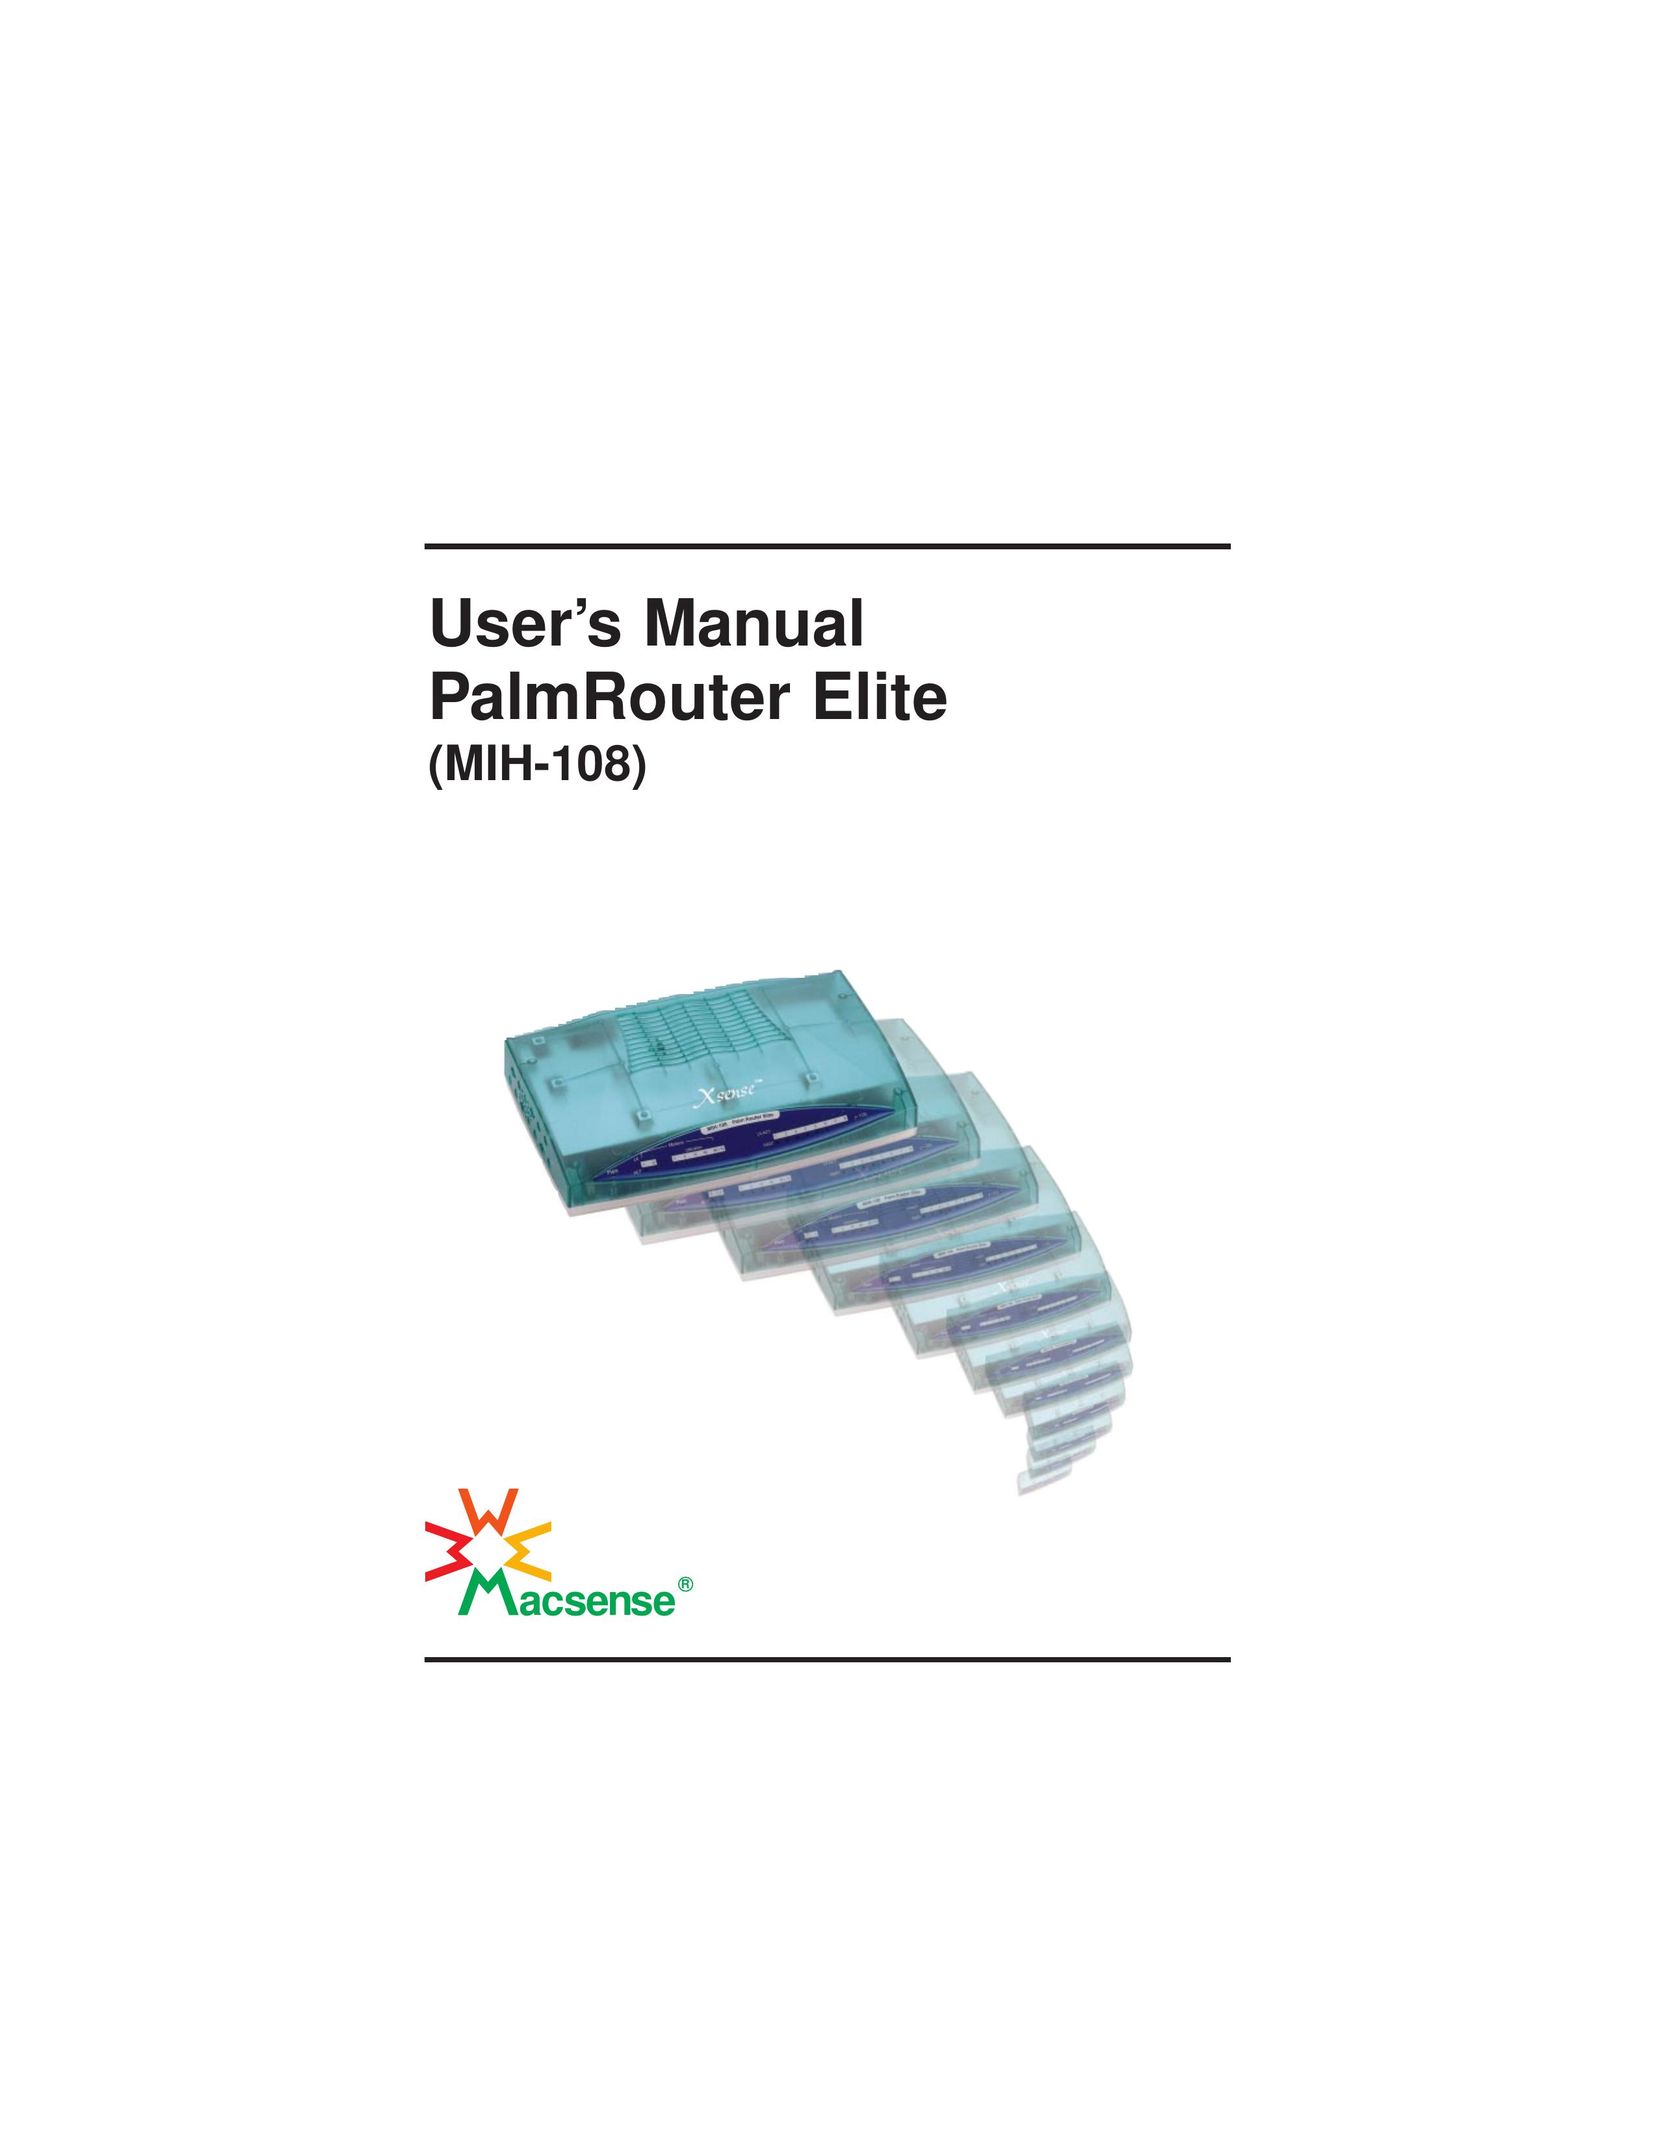 Macsense Connectivity MIH-108 Network Router User Manual